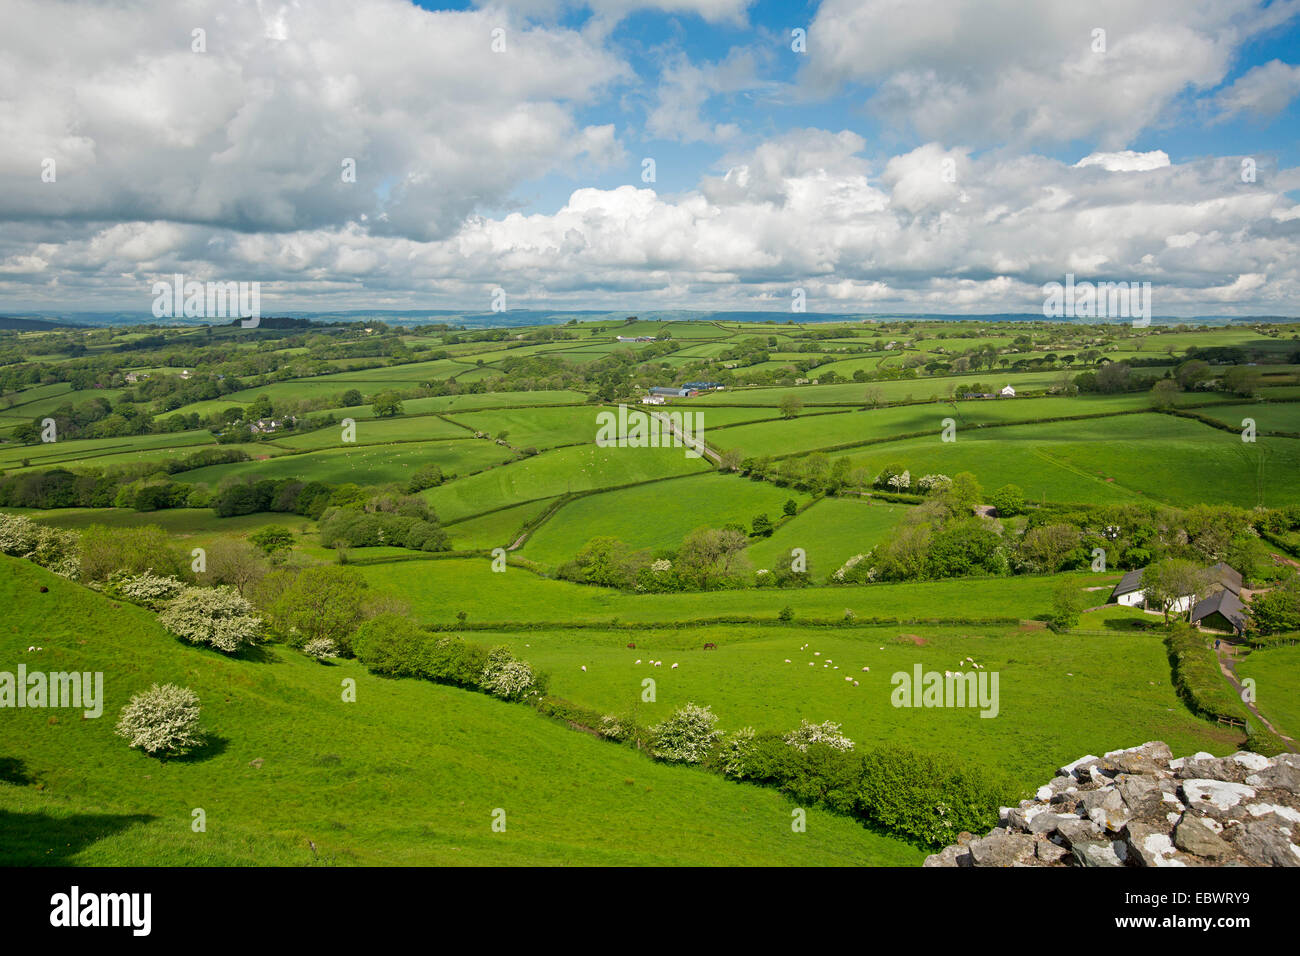 Spectacular view of vast emerald farmlands bordered by hedgerows on hills & valleys stretching to horizon & blue sky - in Wales Stock Photo